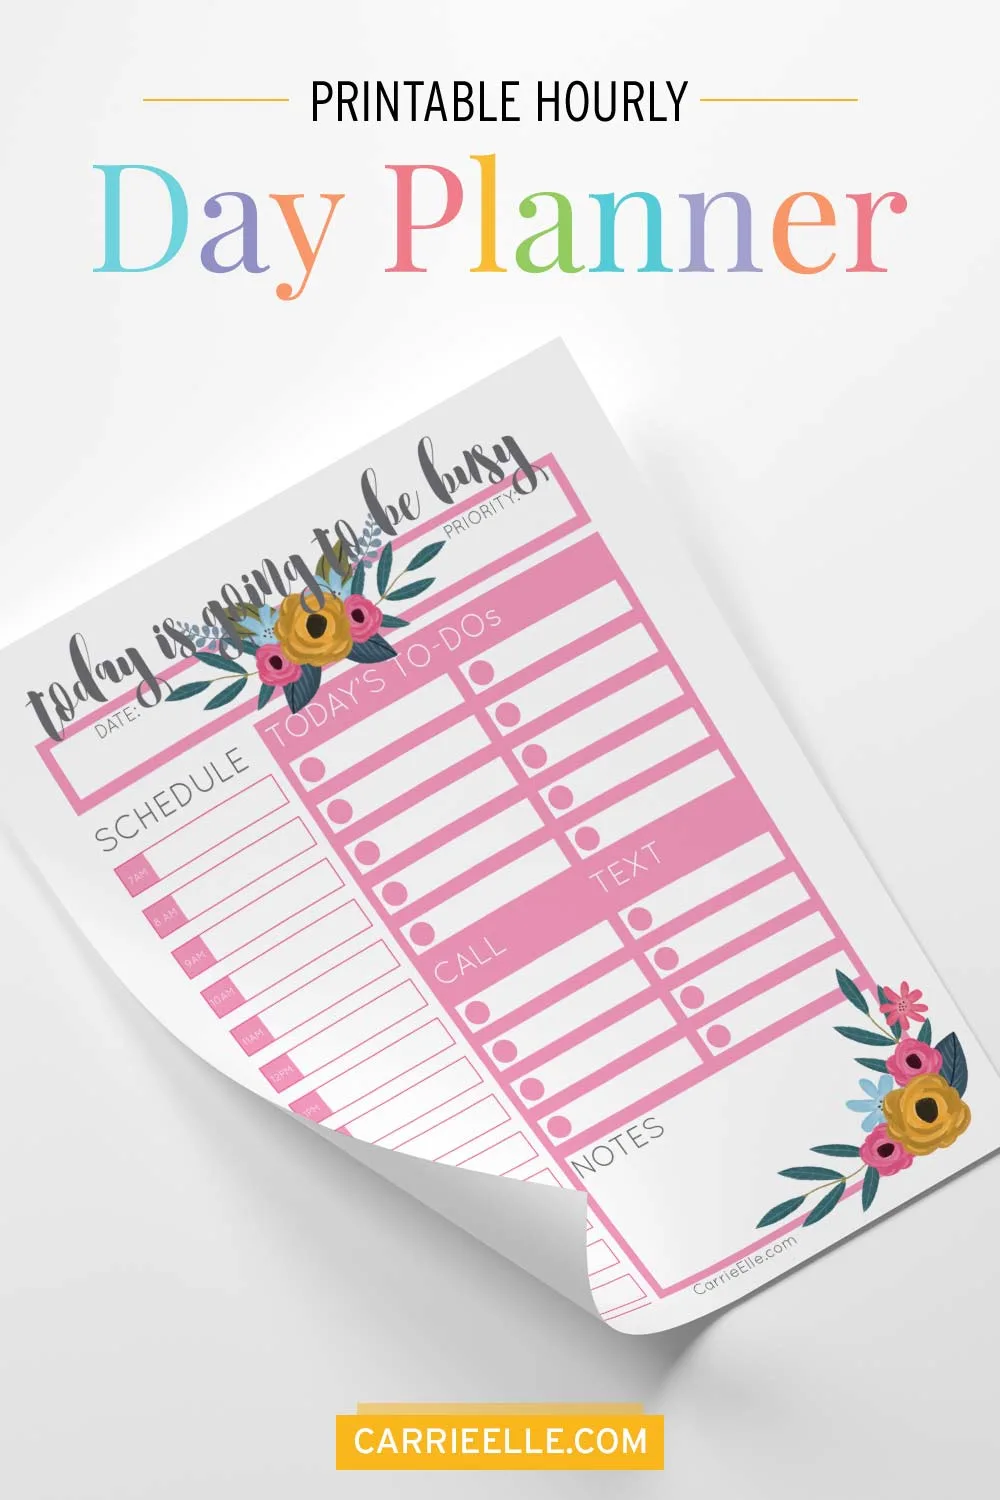 Printable Hourly Day Planner CarrieElle.com